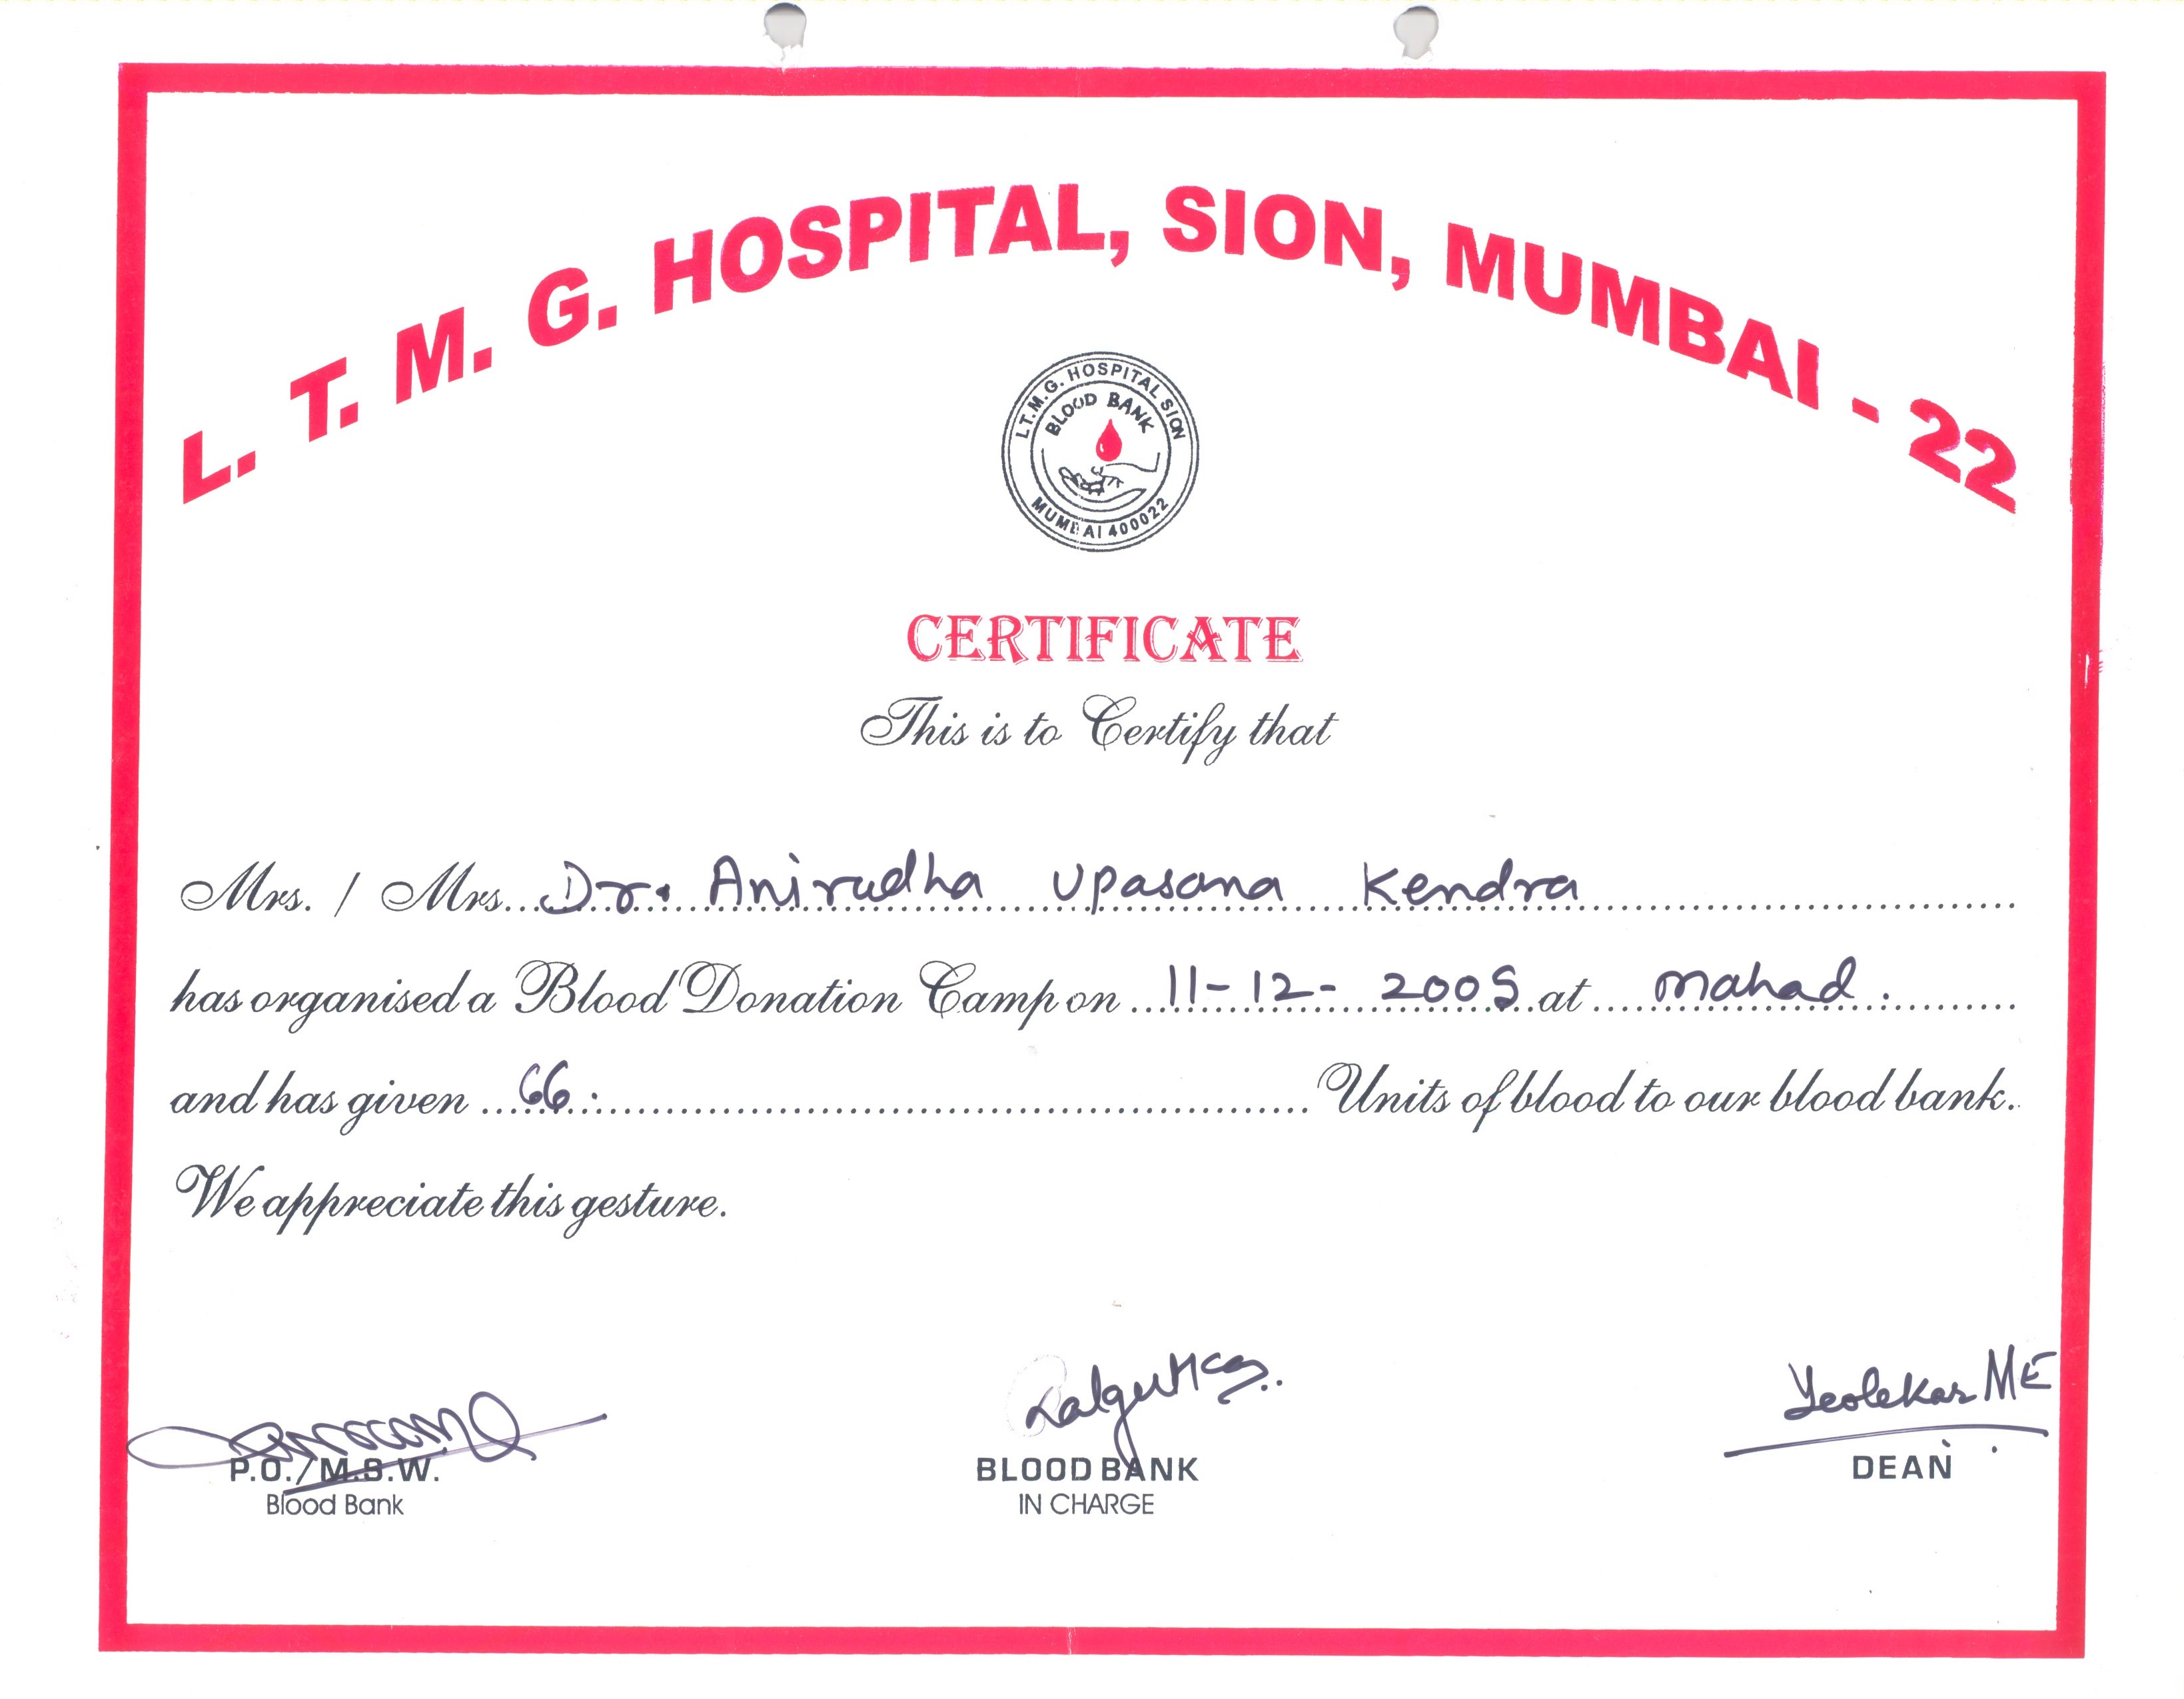 Appreciation-Letter from Sion Hospital 2005-for-Aniruddhafoundation-Compassion-Social-services